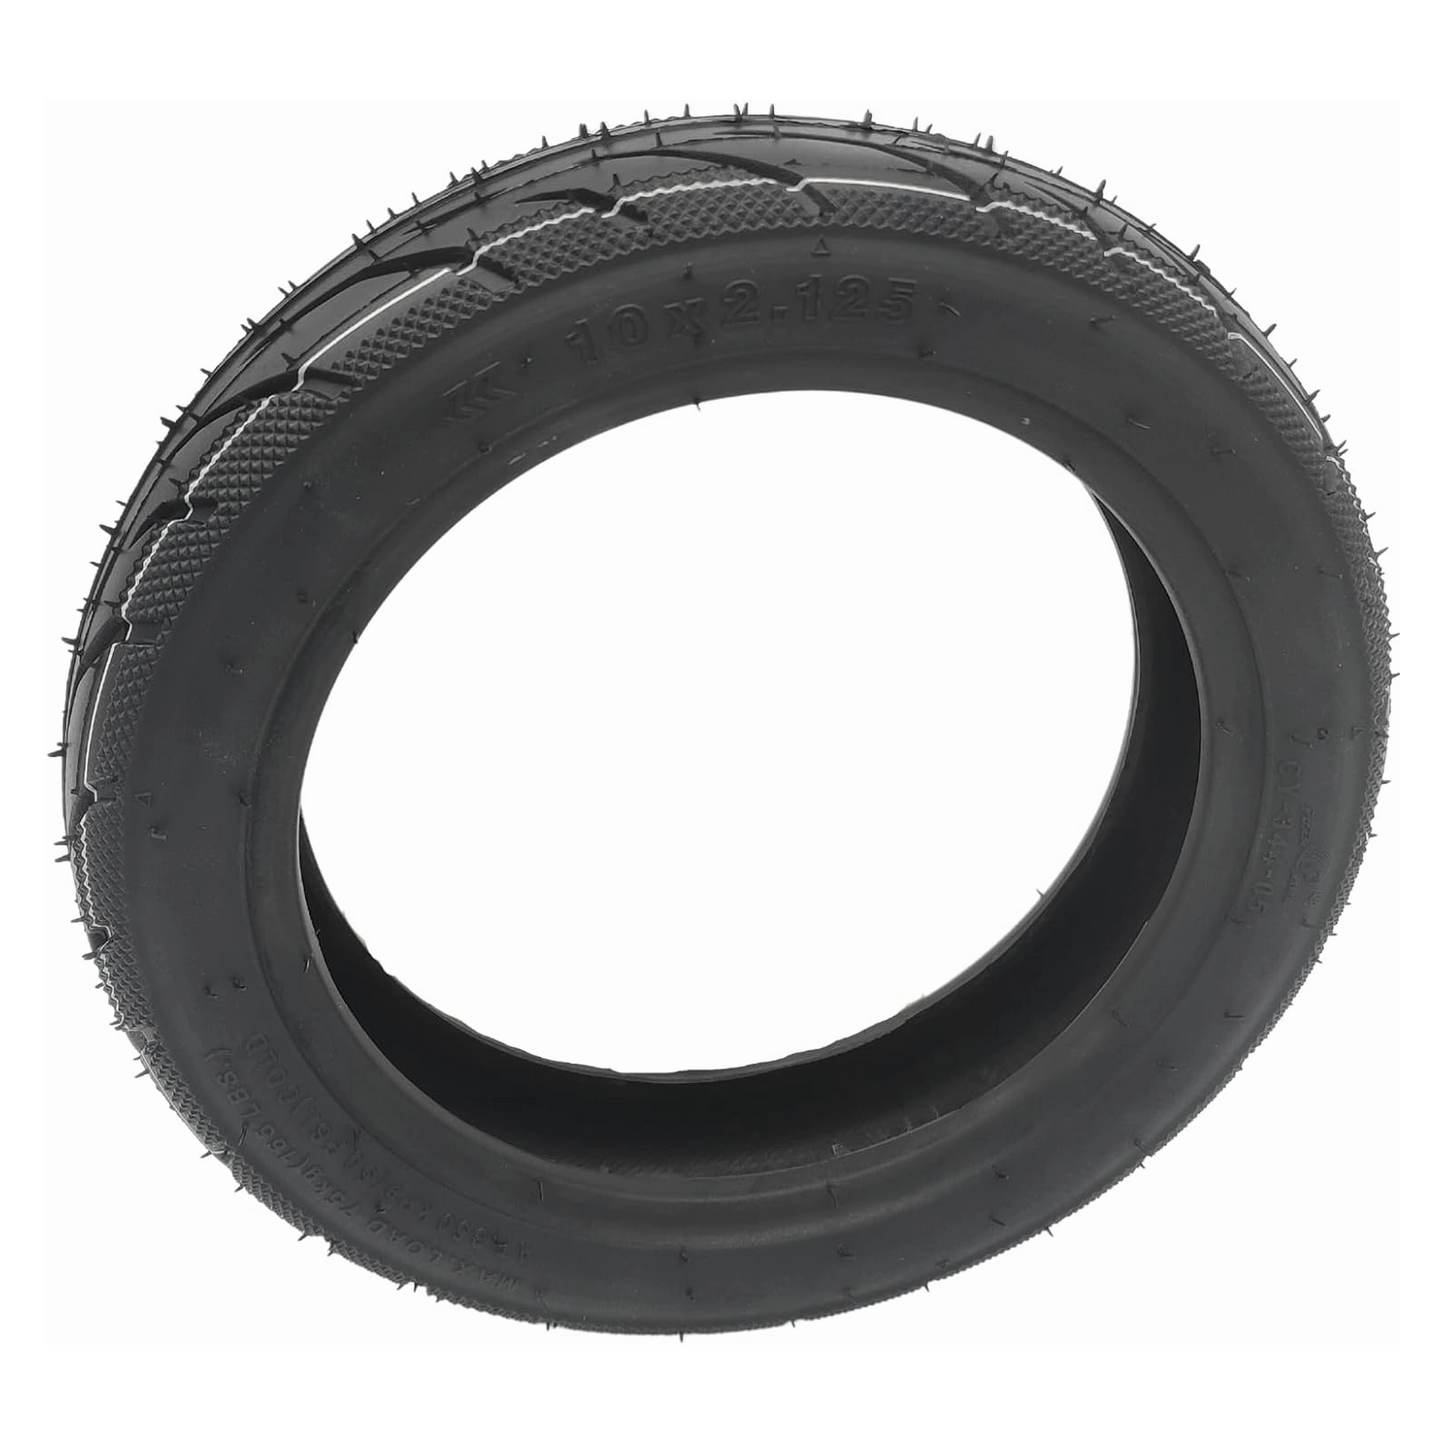 Ninebot Segway F65 tires 10x2.125 - 6.5 inches